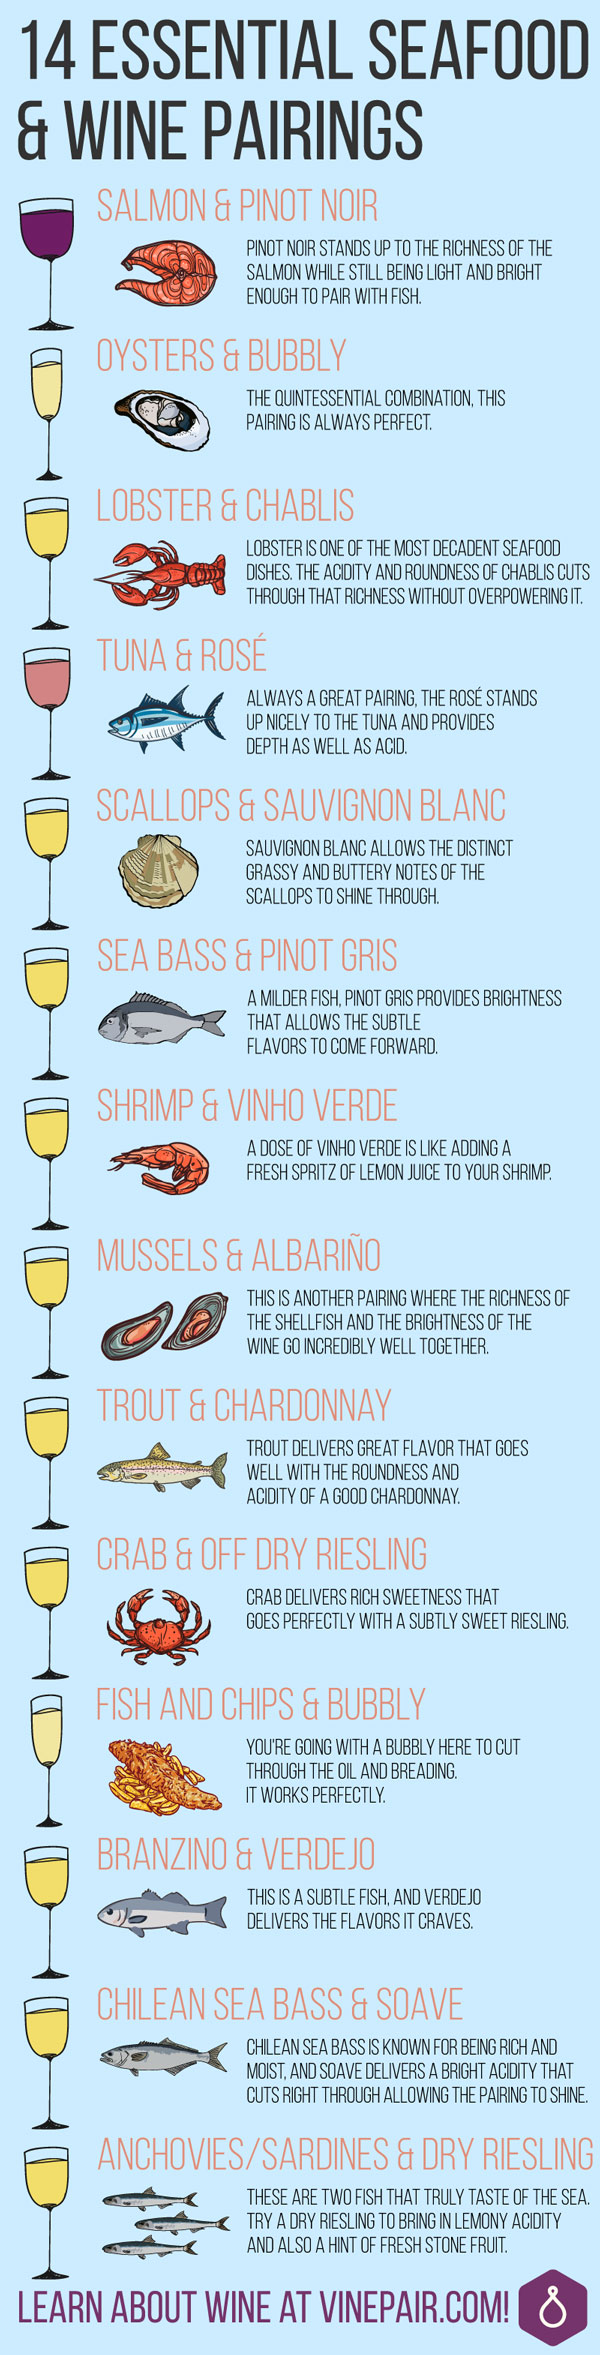 Pairing-Wine-with-Seafood